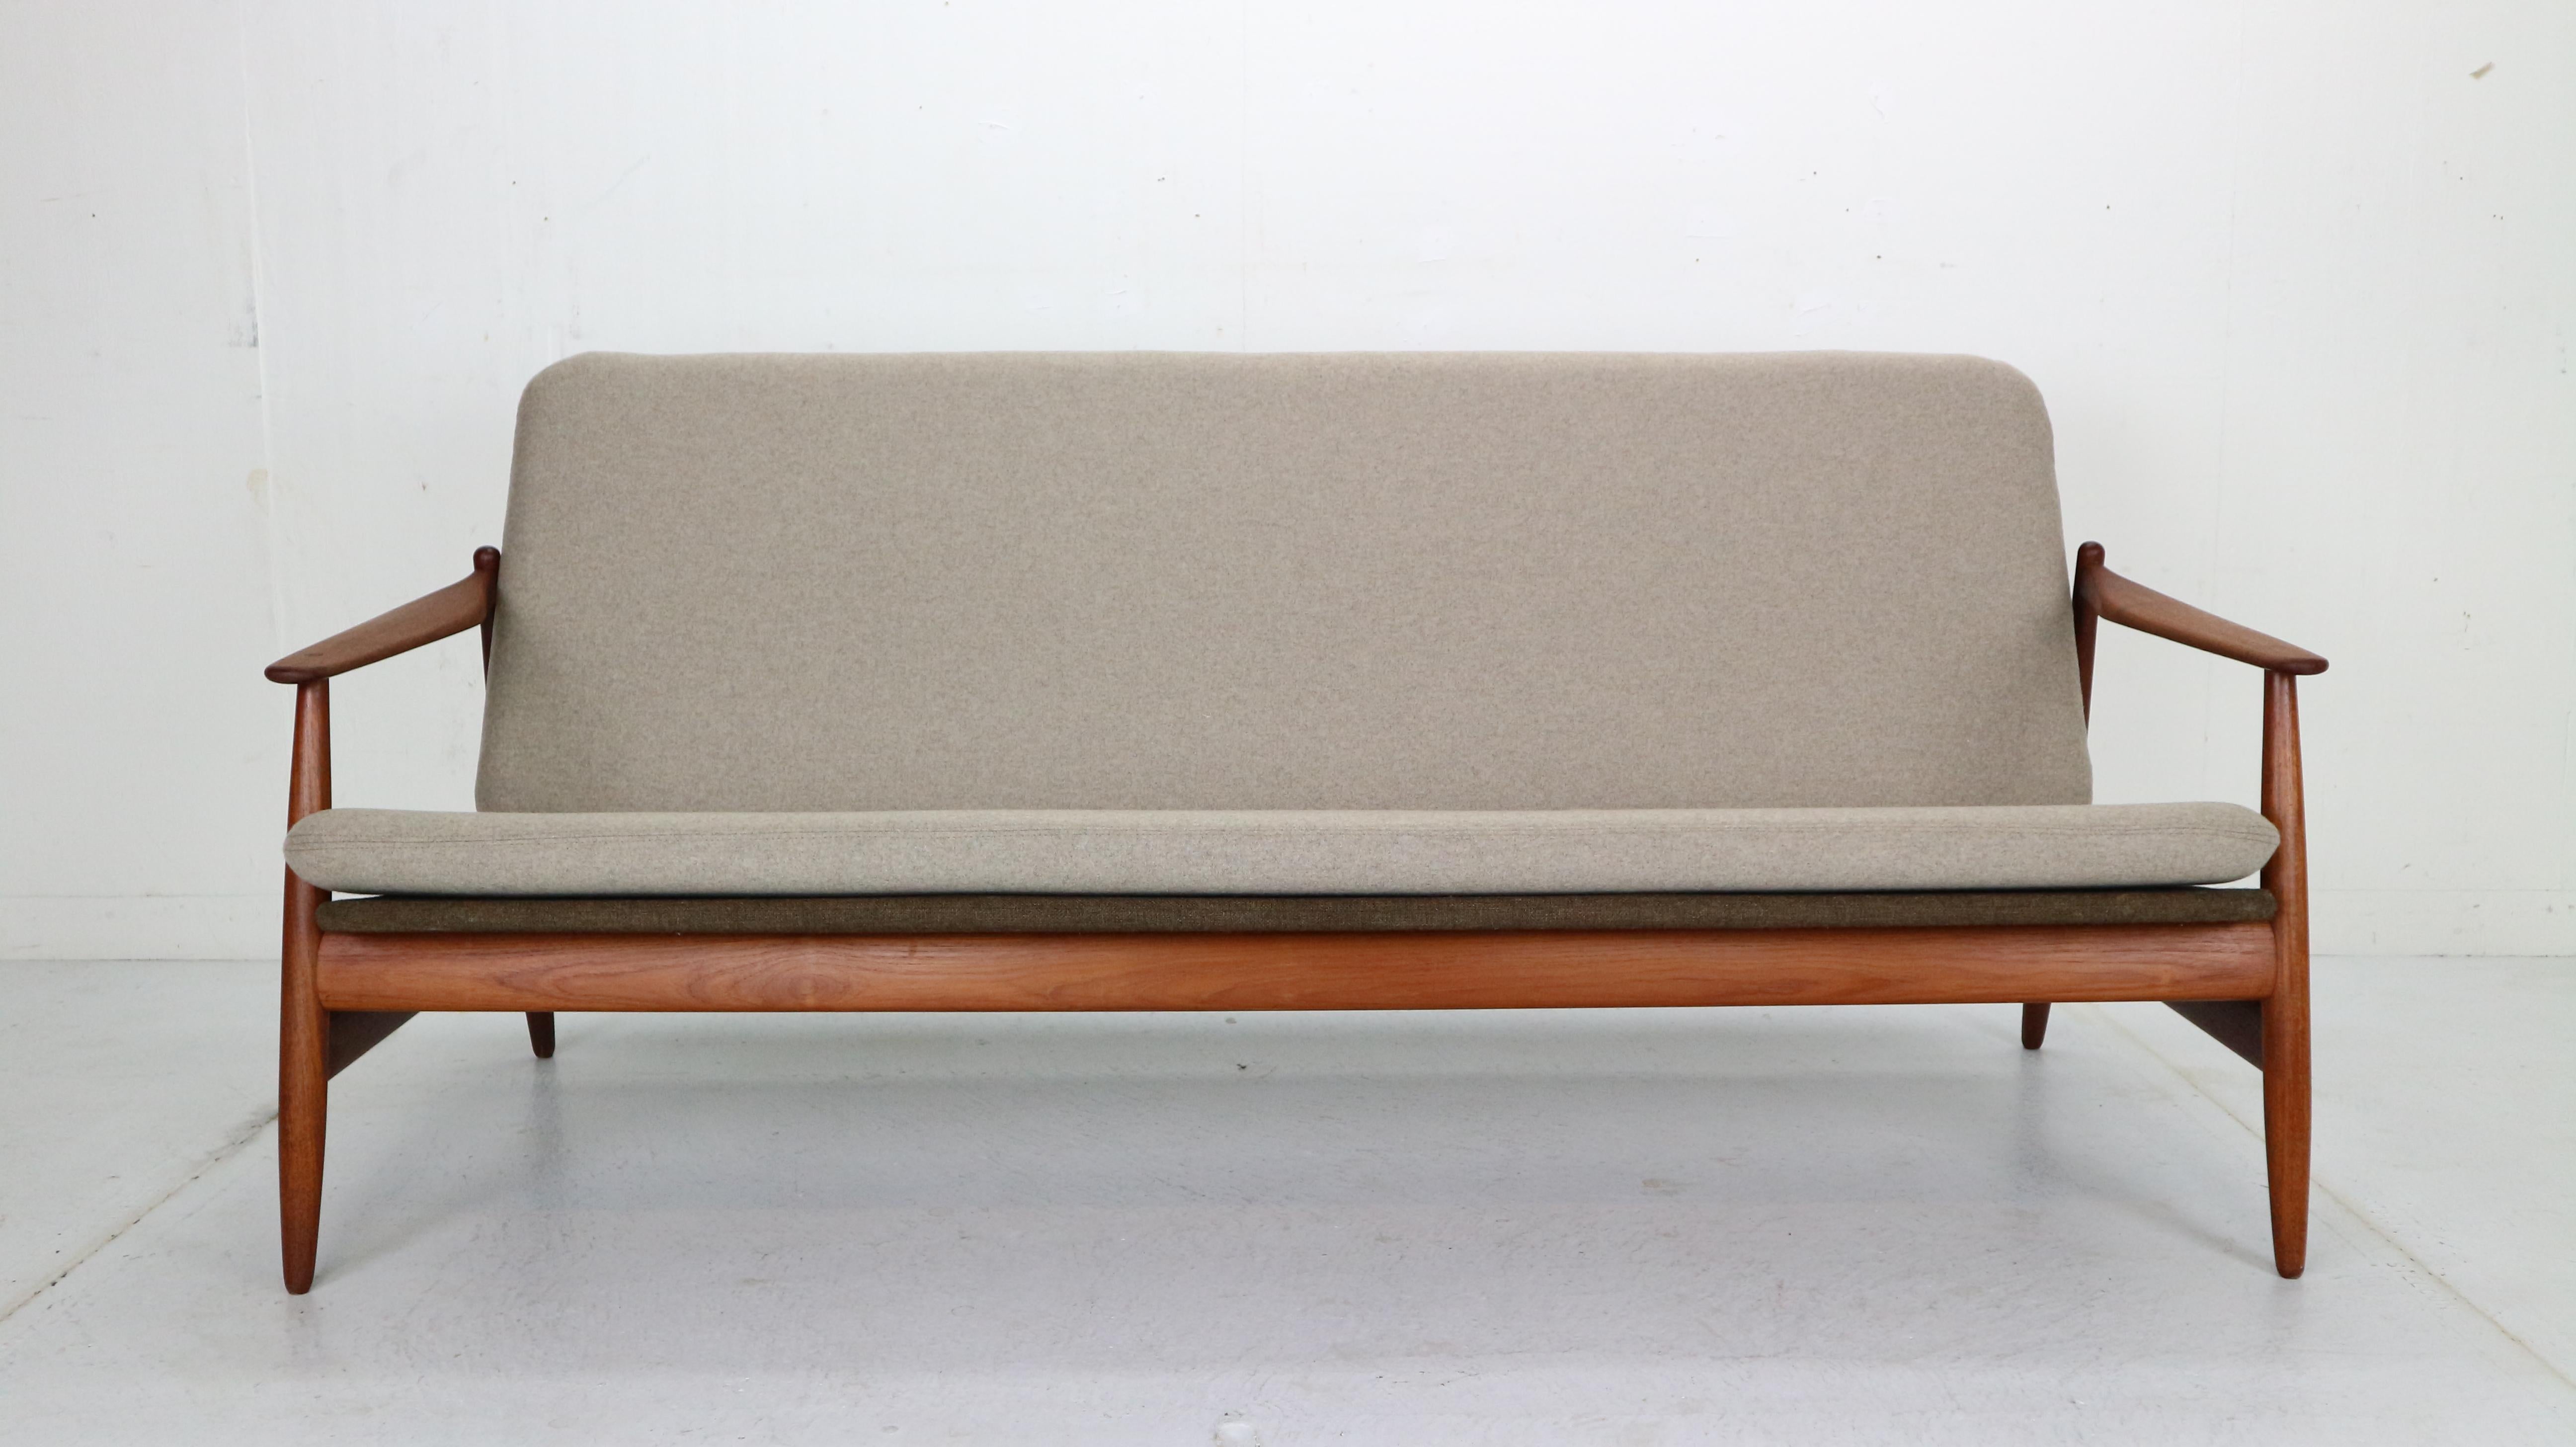 Danish modern period sofa made in 1960's by Poul M. Volther and manufactured by Frem Rojle, Denmark.
Elegantly curved teak frame and two colour seating witch has been newly reupholstered in a wool fabric. Three colour combination makes the sofa